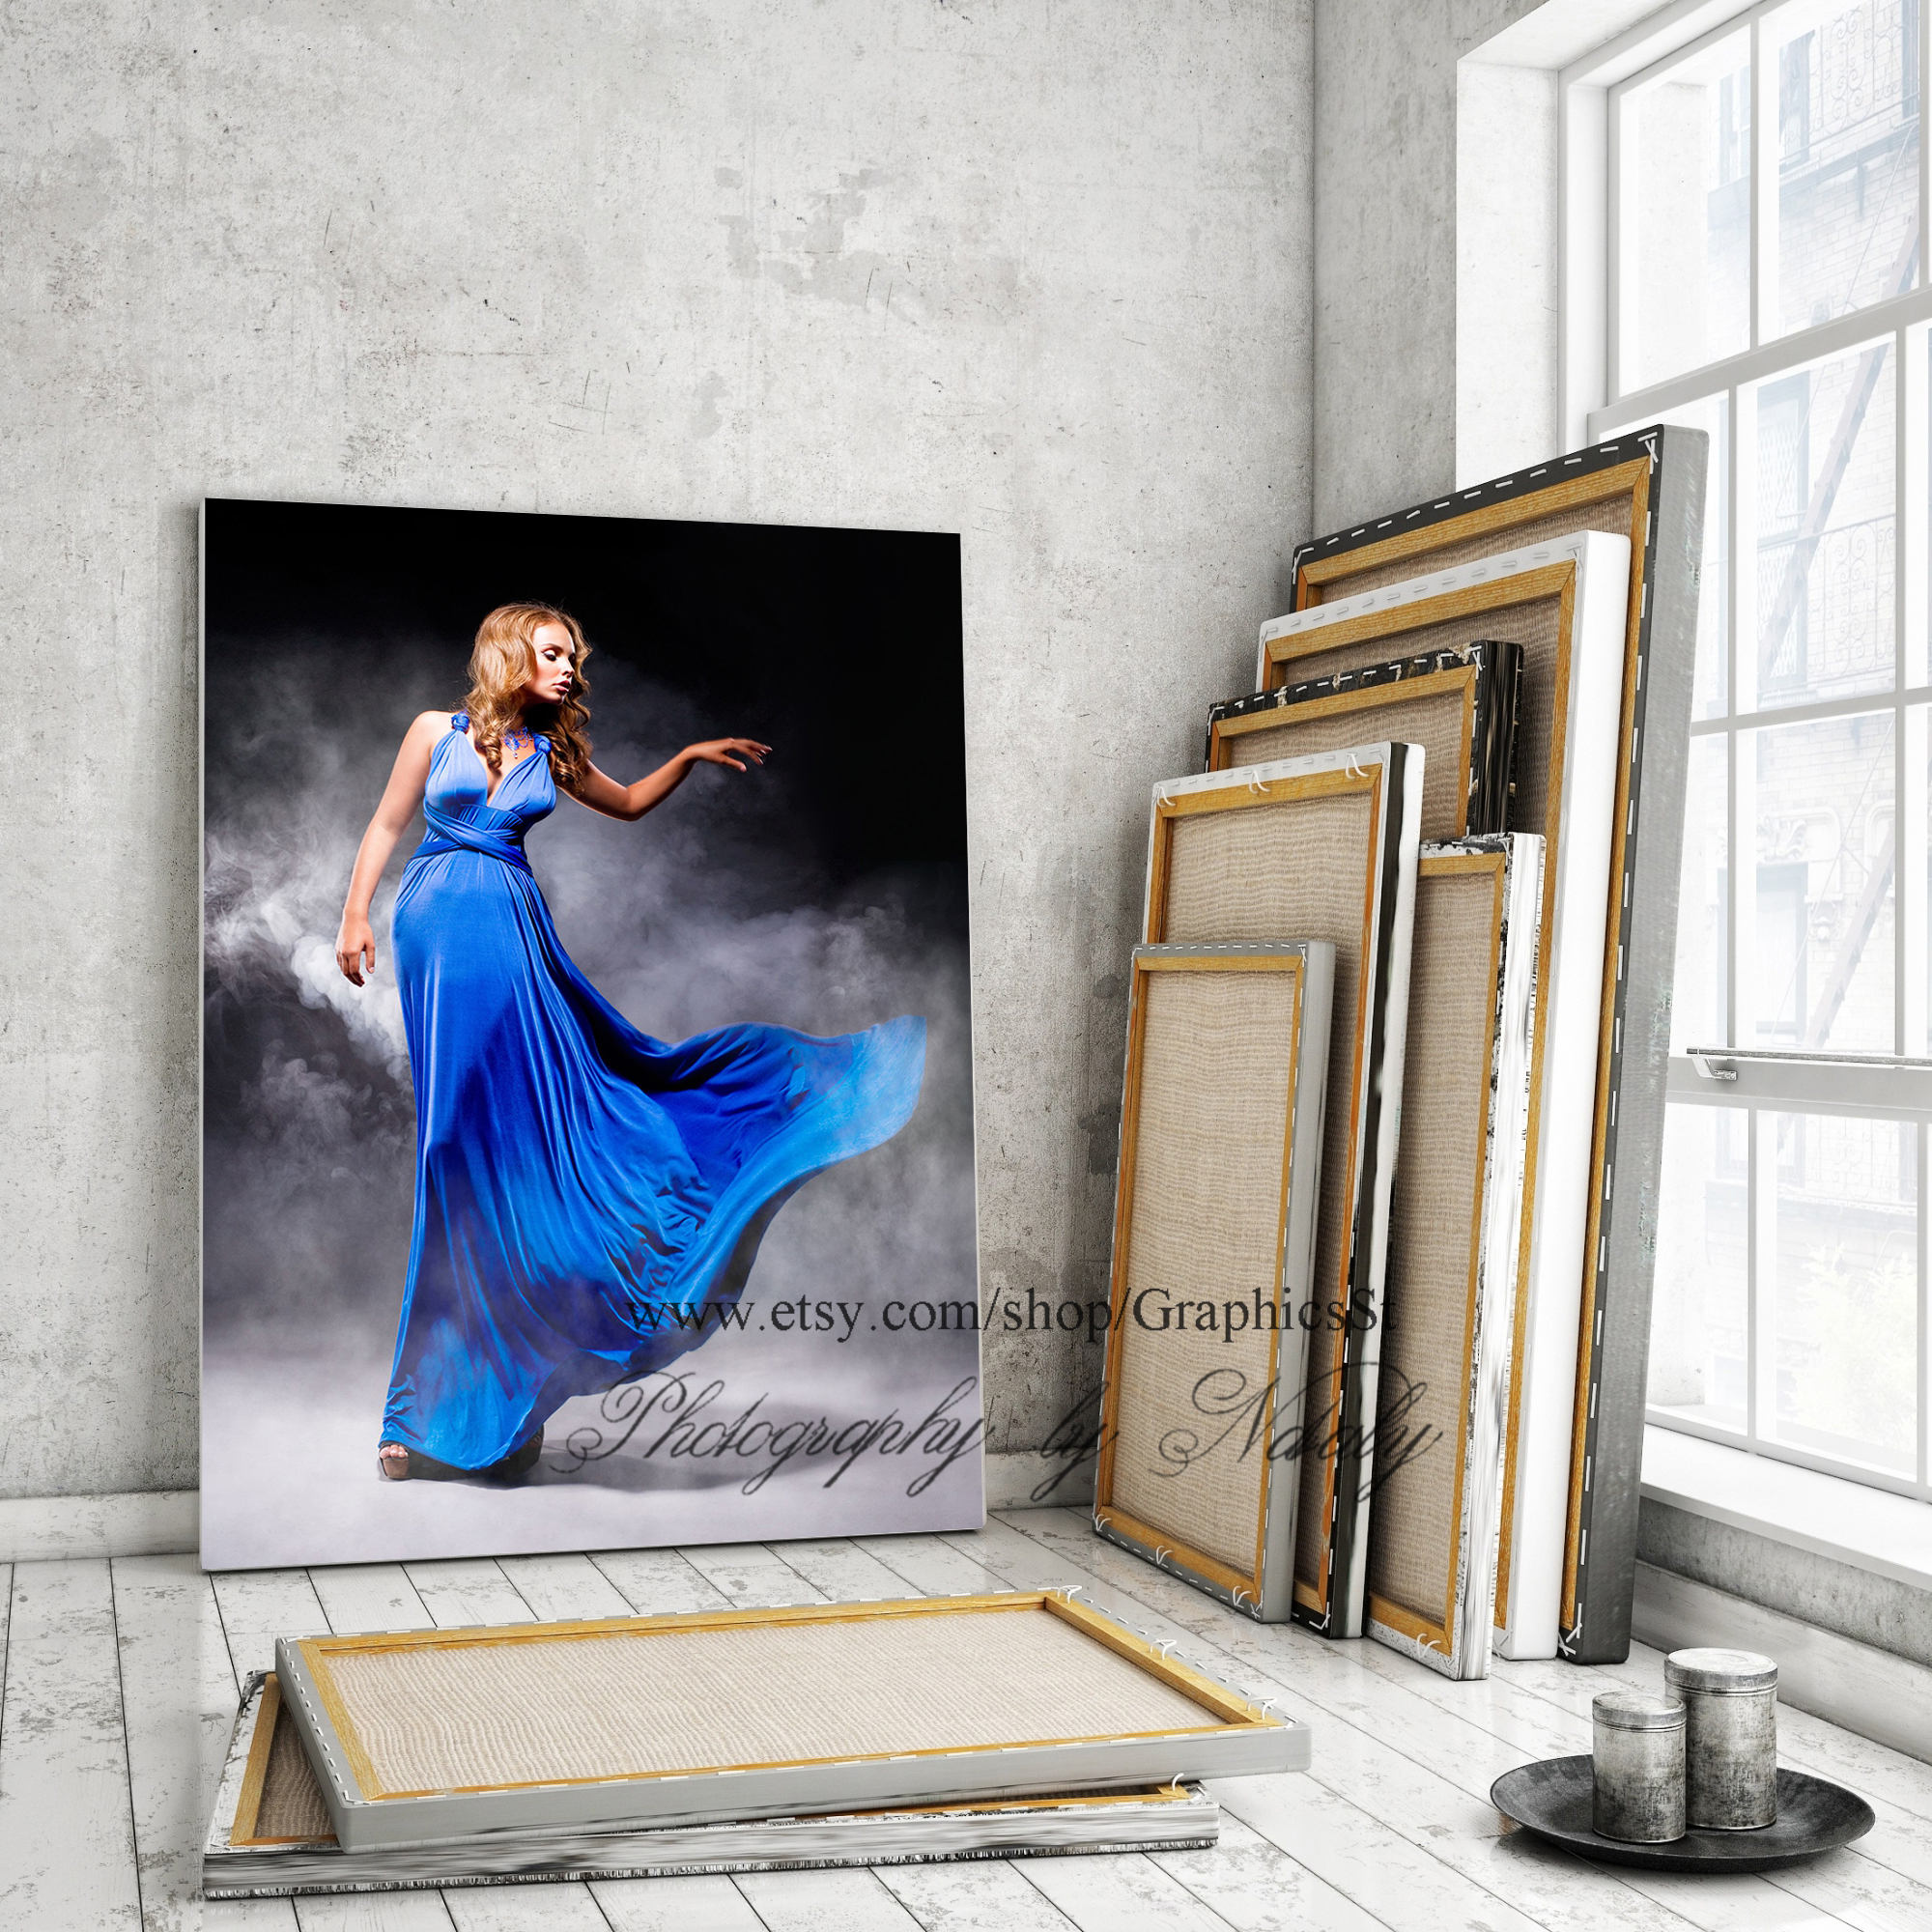 smart object photoshop Artist/'s studio mock up easy editable Canvas Mockup .psd template for Photoshop Wooden easel mock up